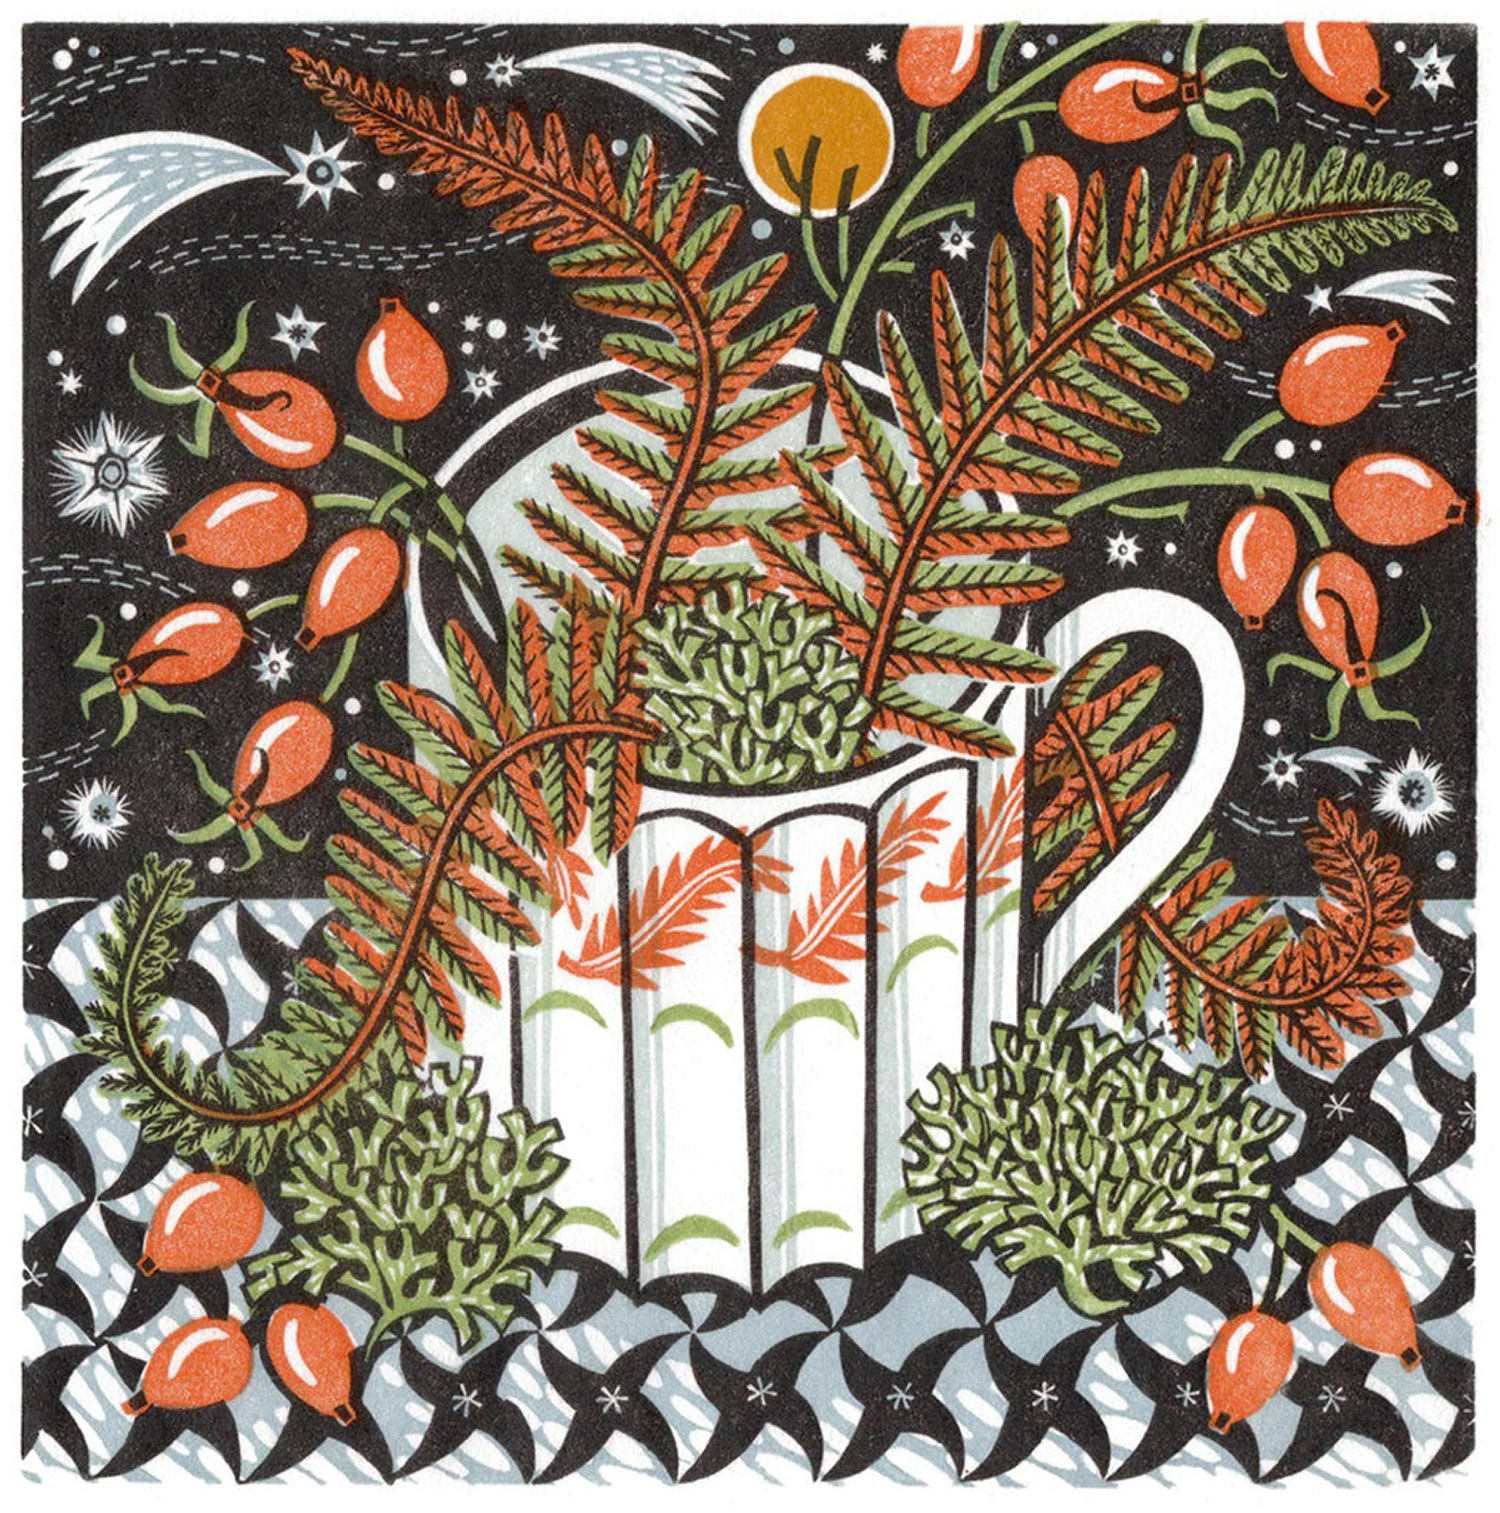 Fern Cup by Angie Lewin